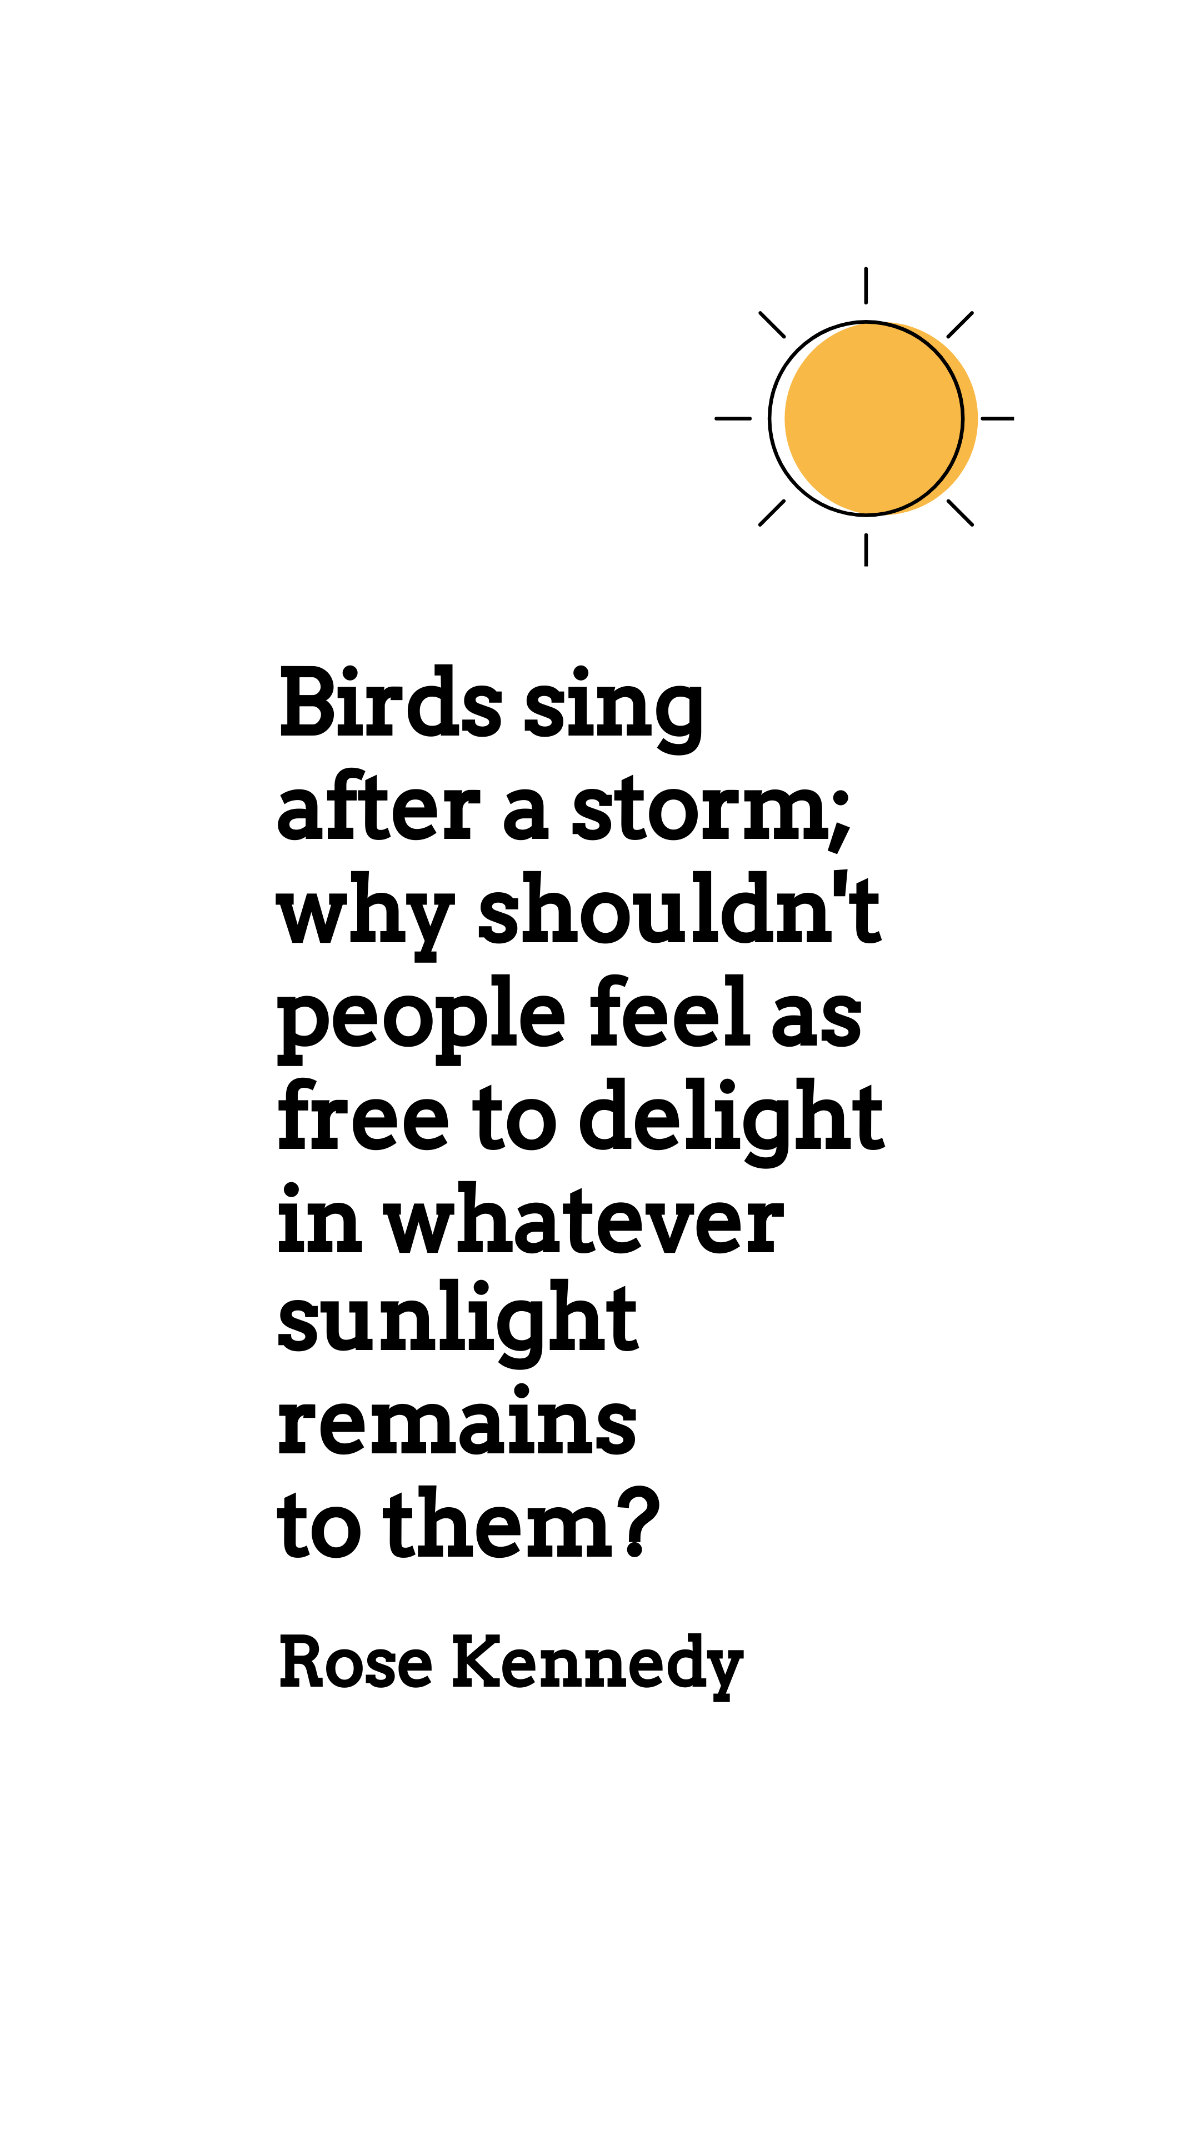 Free Rose Kennedy - Birds sing after a storm; why shouldn't people feel as to delight in whatever sunlight remains to them? Template